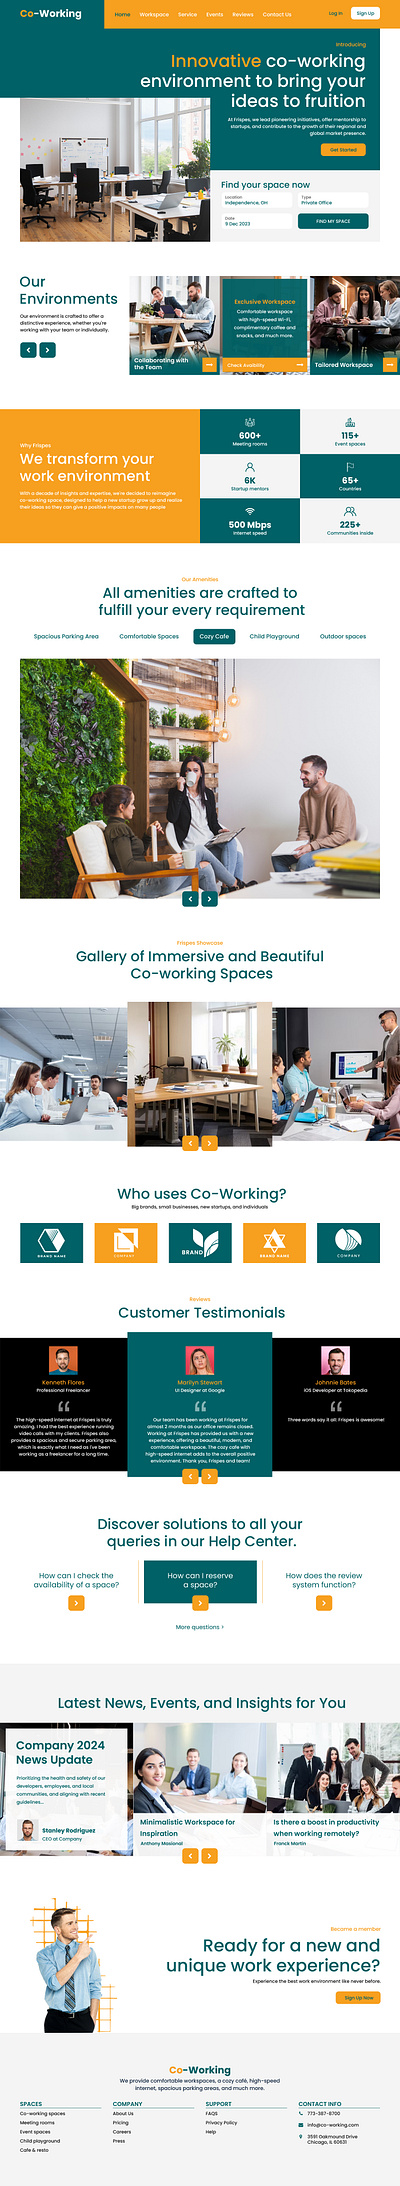 Co-working Business Website Landing Page UI Design business website landing page business website ui design design landing page design landing page ui design ui ui design